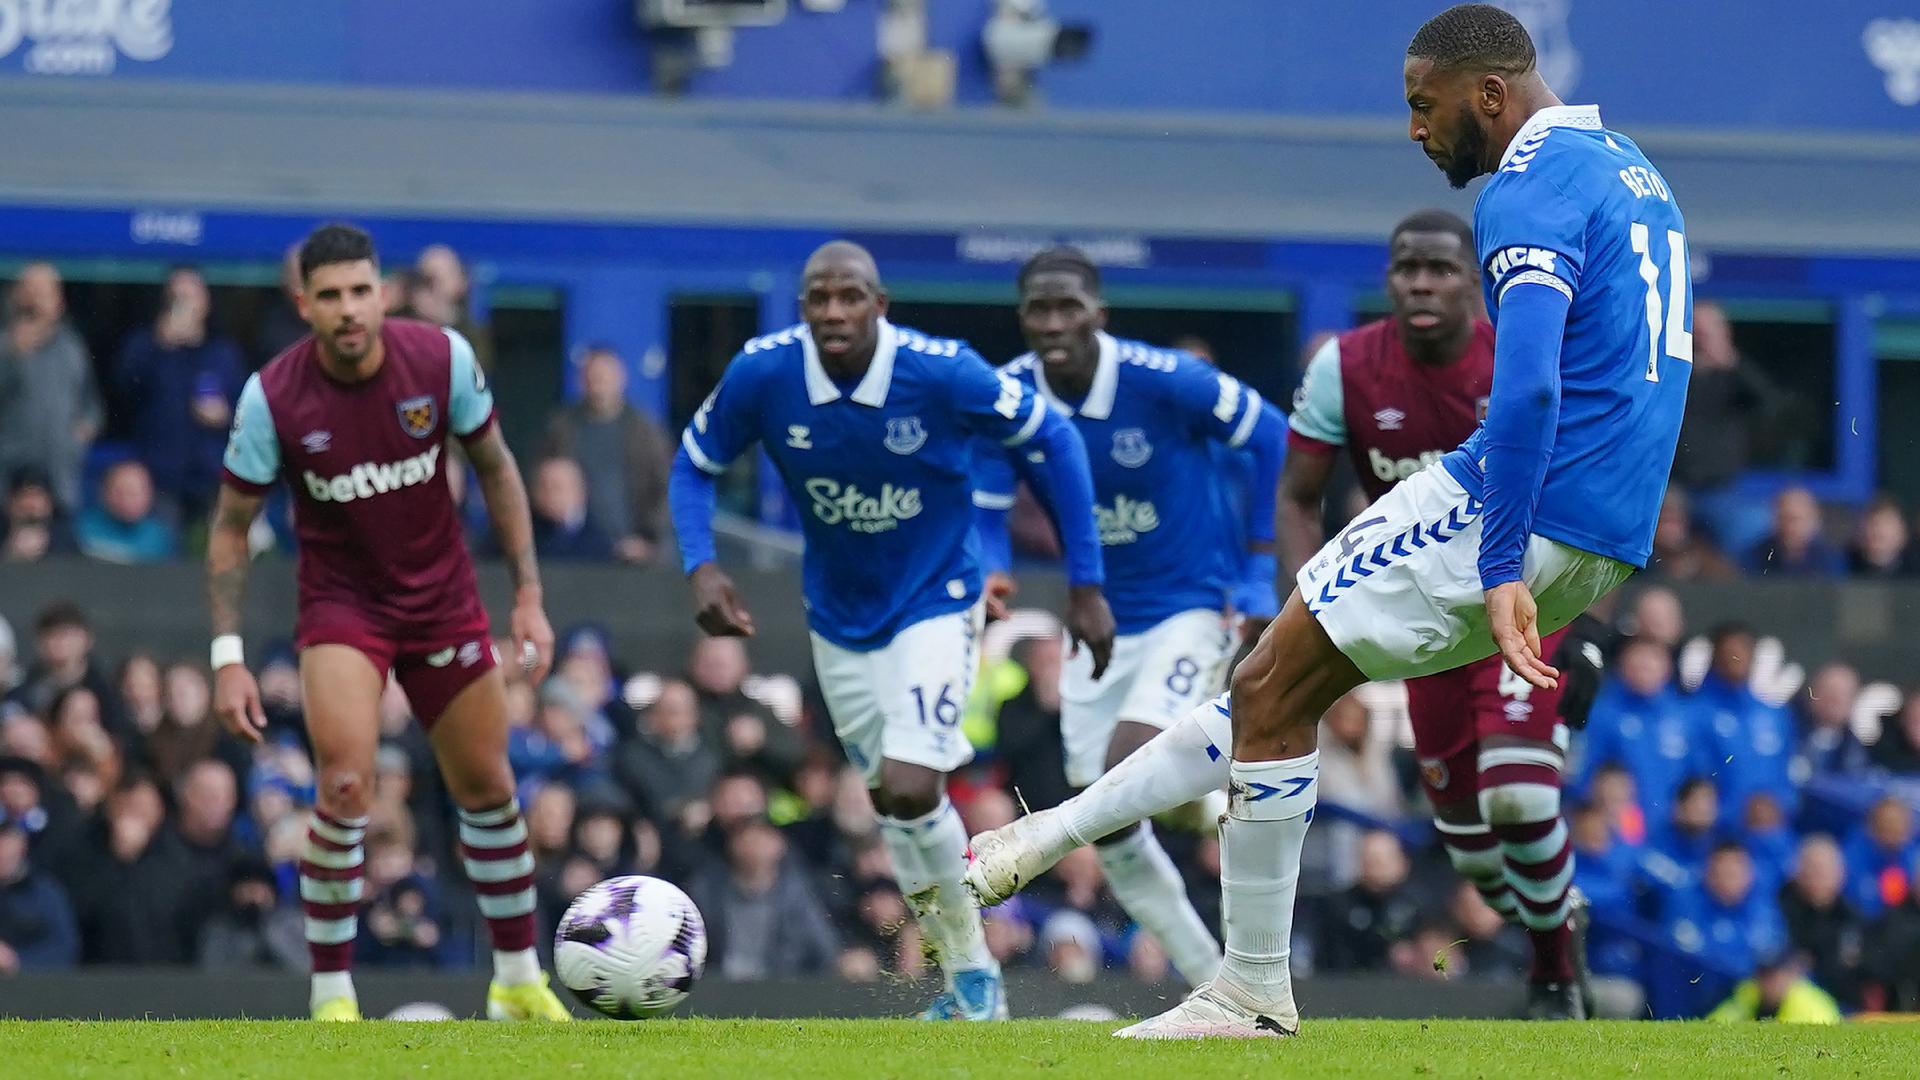 Sean Dyche tells Everton players to take responsibility for missed chances